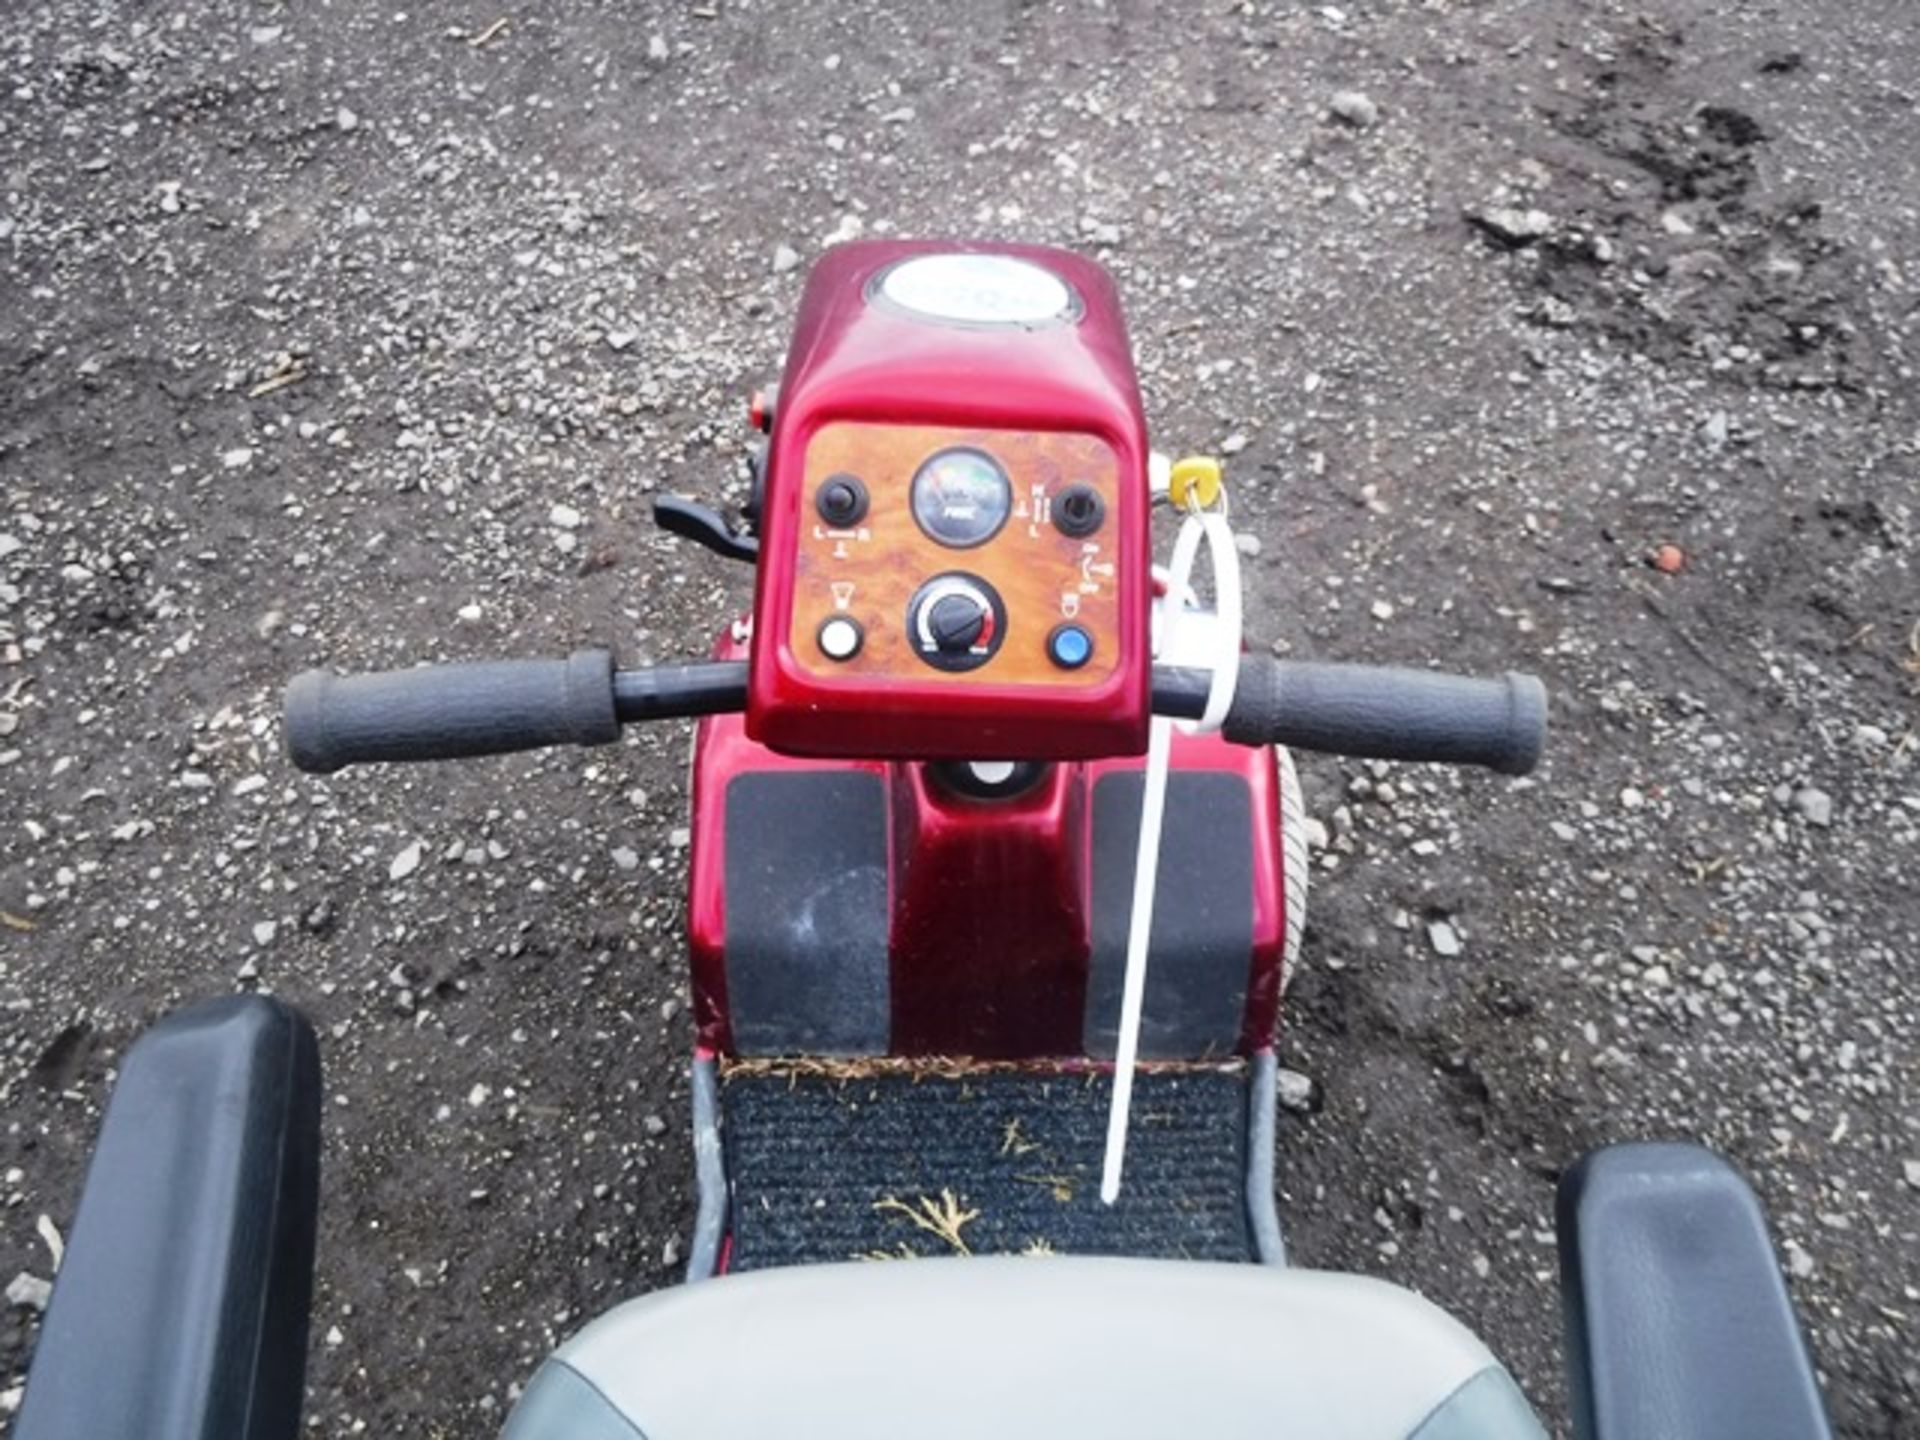 RED MOBILITY SCOOTER, WITH KEYS, NO CHARGER, MINOR DENTS / SCRATCHES, ELECTRICS WORKING - Image 3 of 3